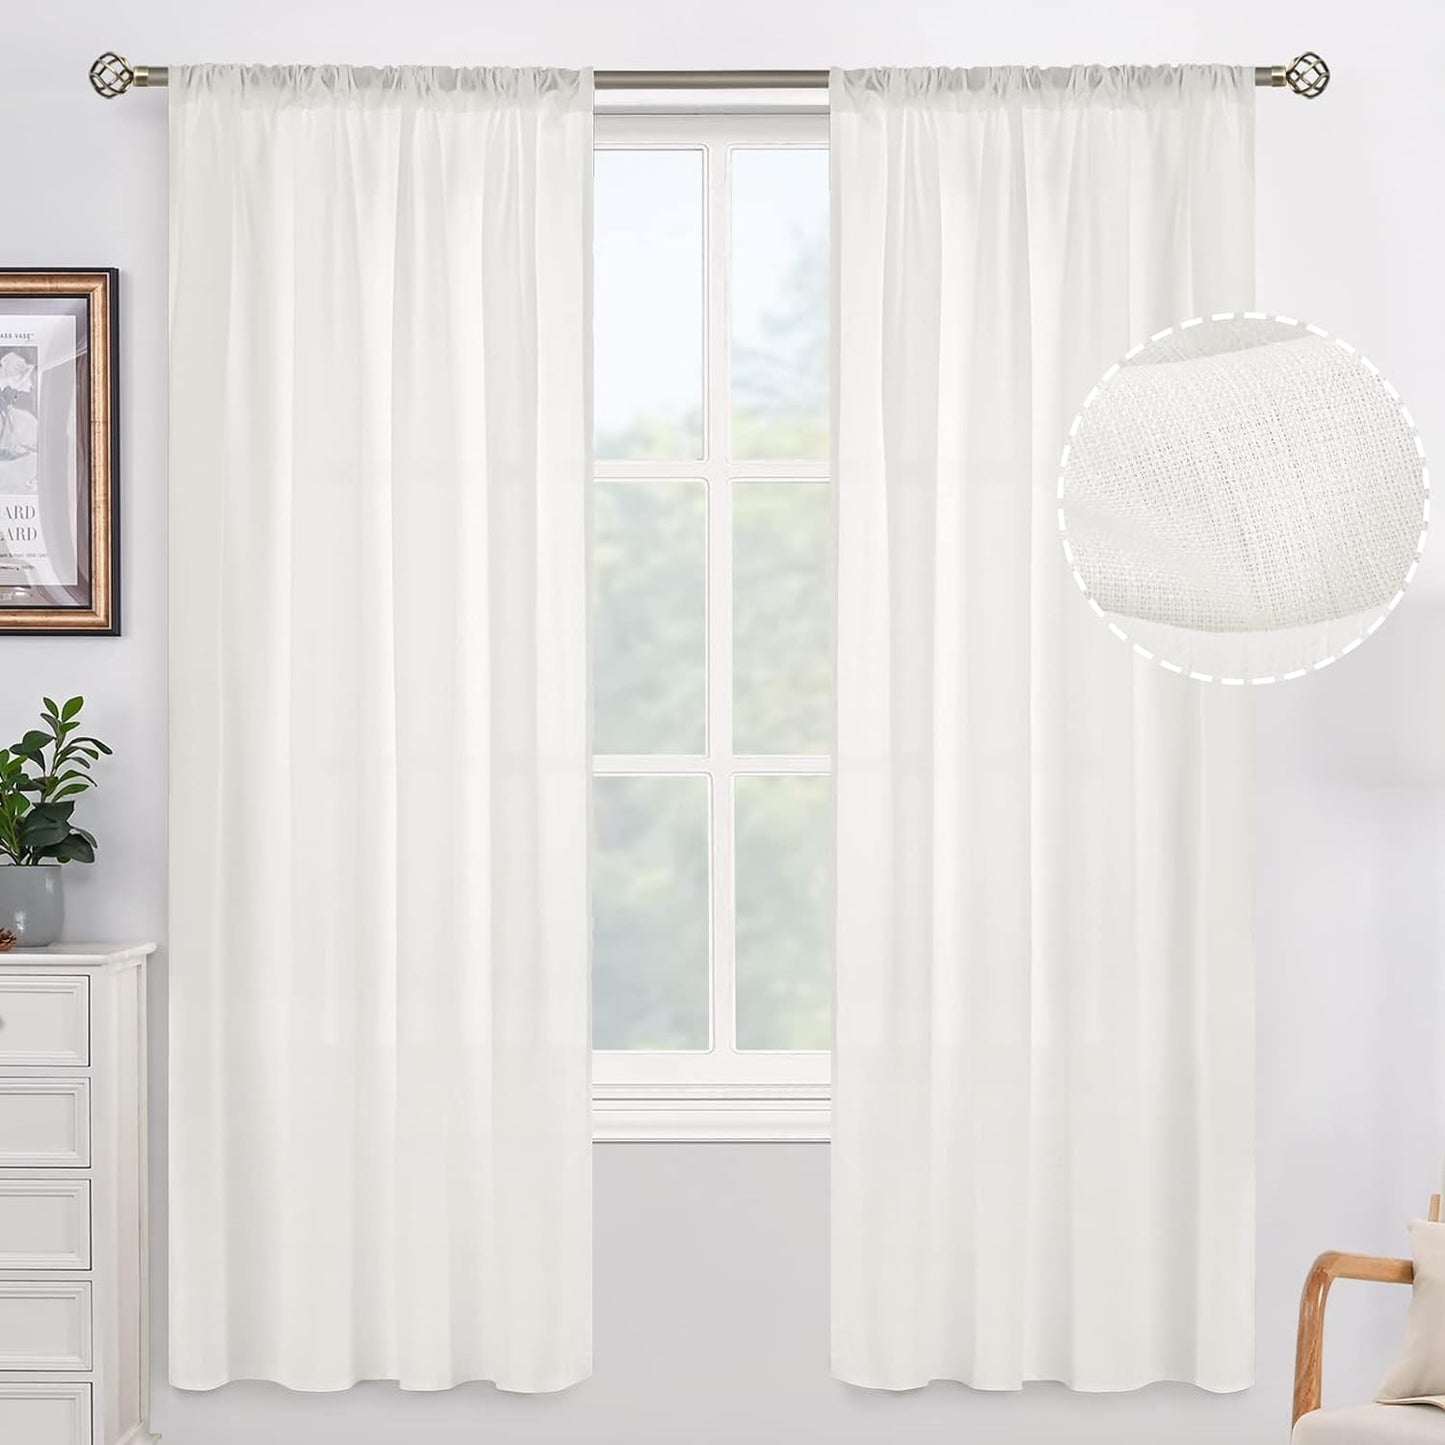 Bgment White Semi Sheer Curtains 95 Inch for Bedroom, Linen Look Rod Pocket Light Filtering Privacy Sheer Curtains for Living Room, Opaque White Sheer Curtains 2 Panels, Each 42 X 95 Inch  BGment Ivory Cream 42W X 72L 